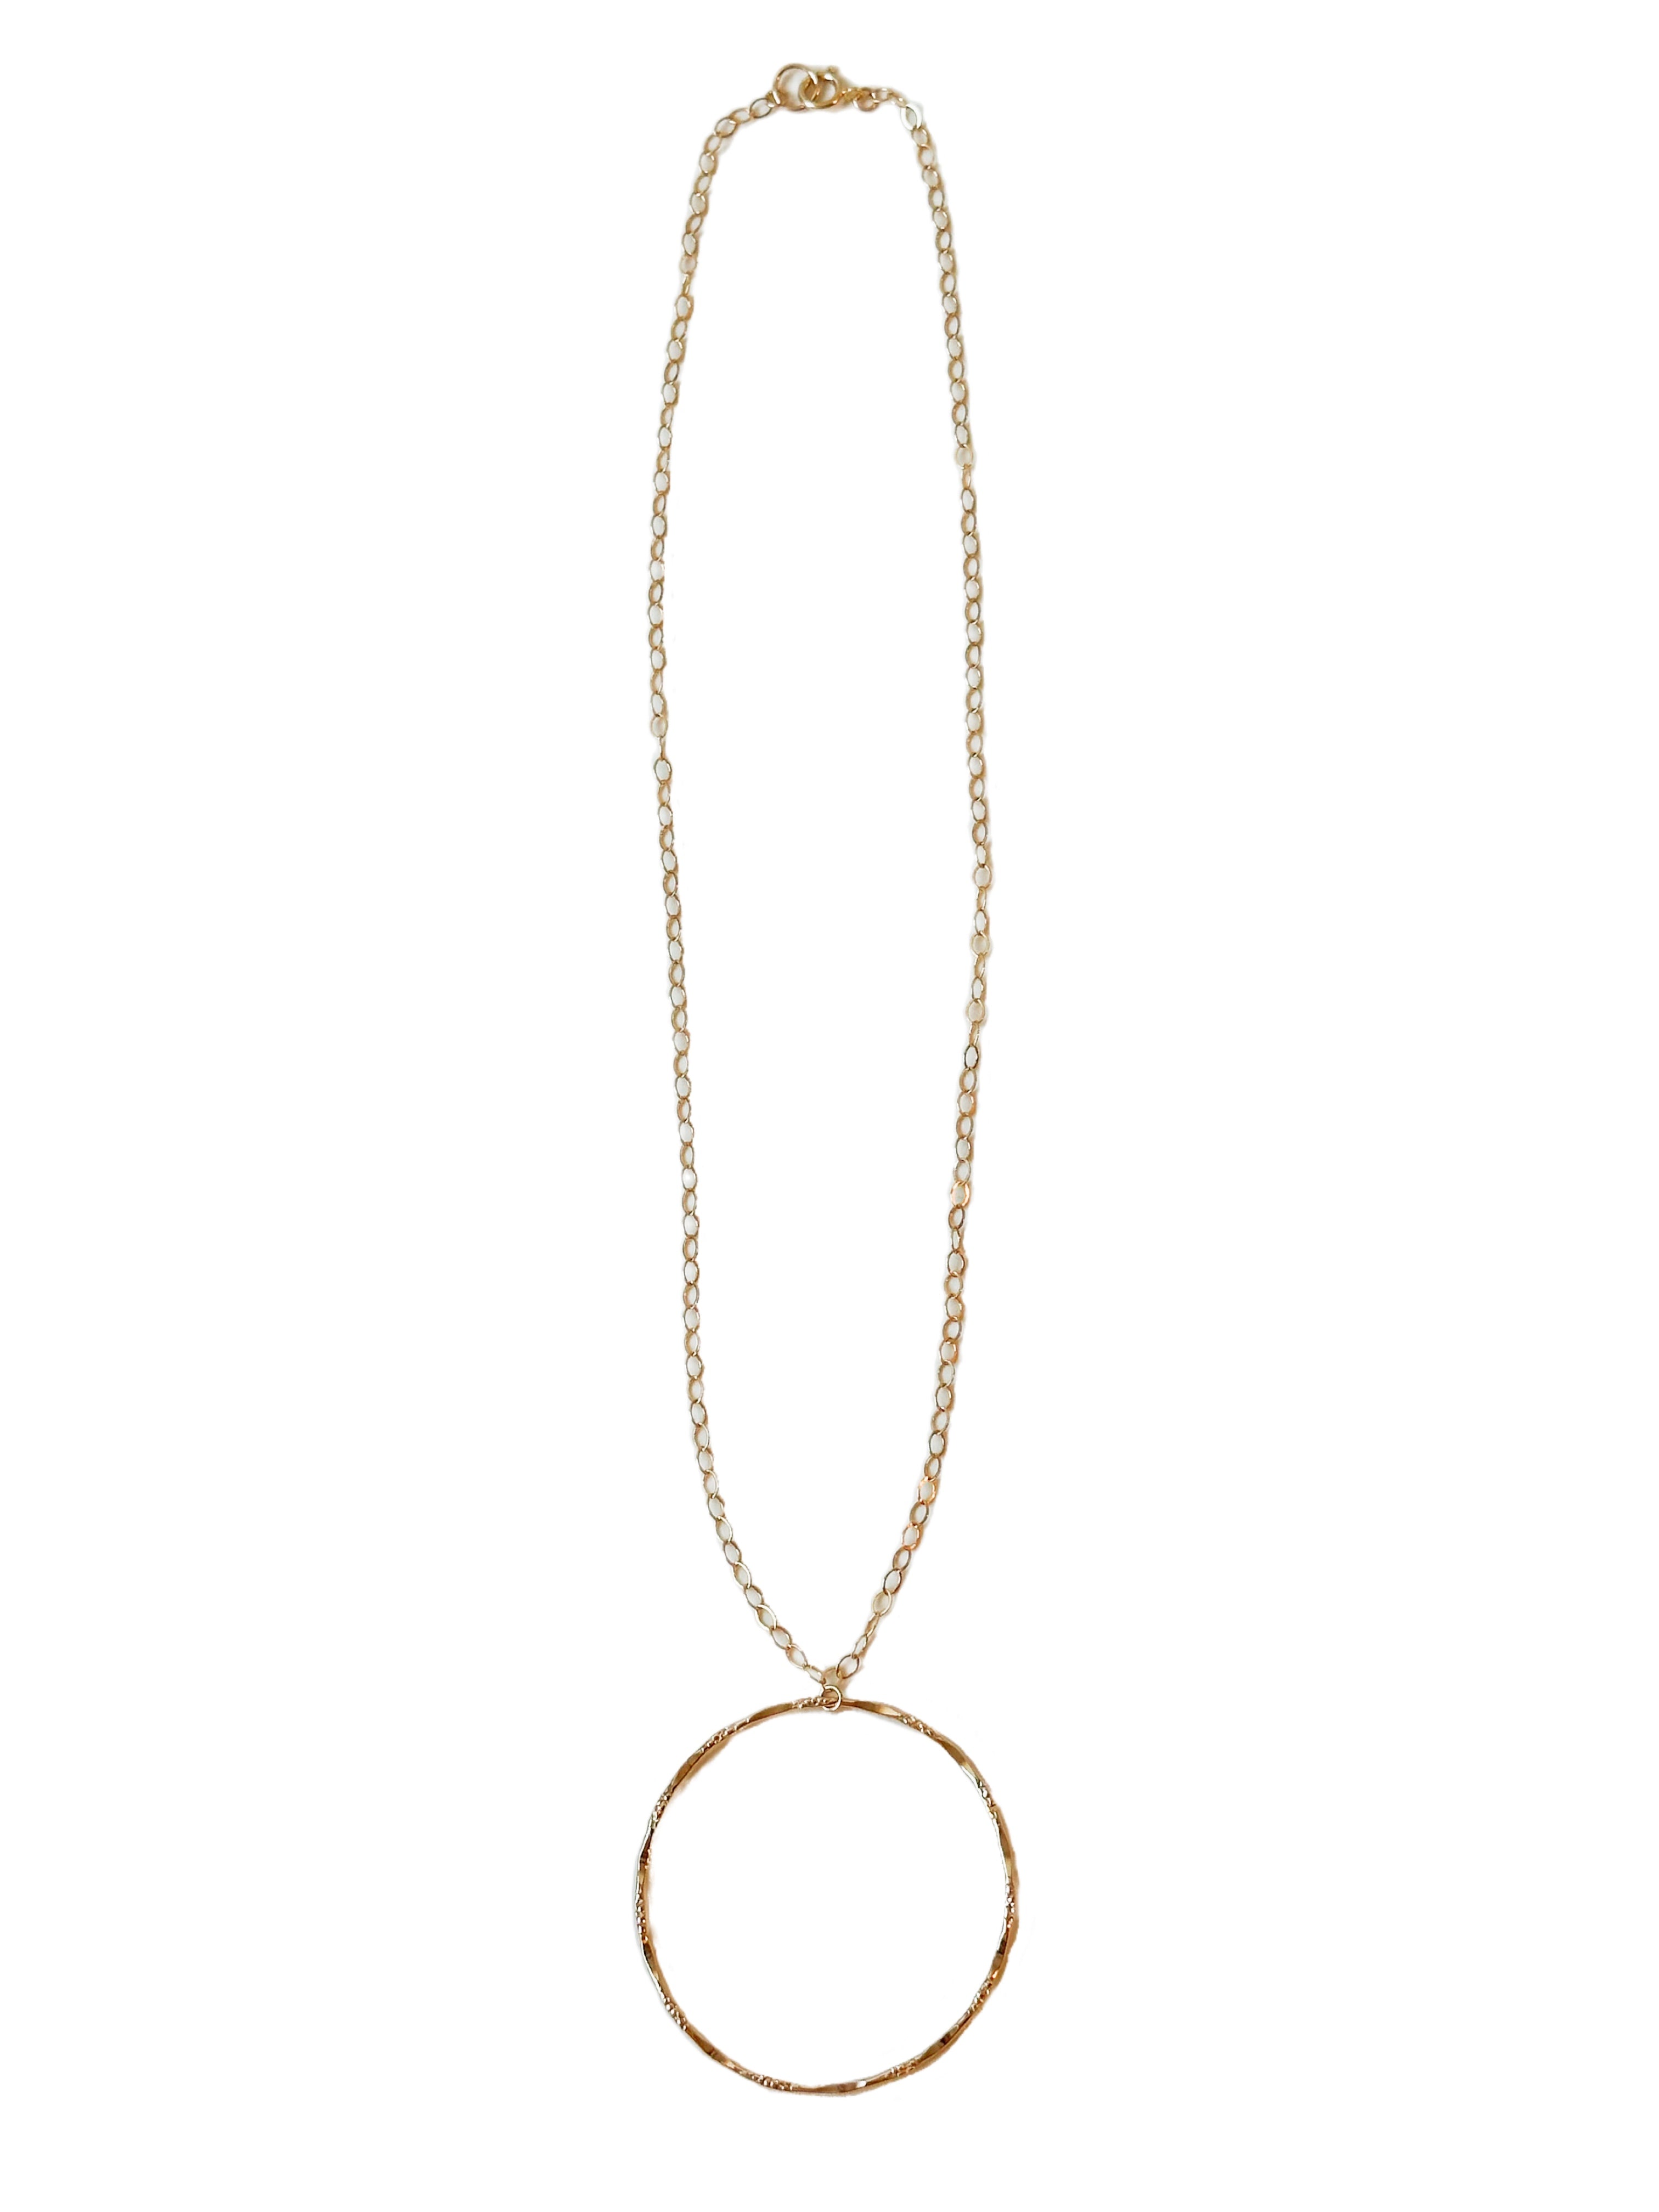 Juliet - necklace with gold-filled circle